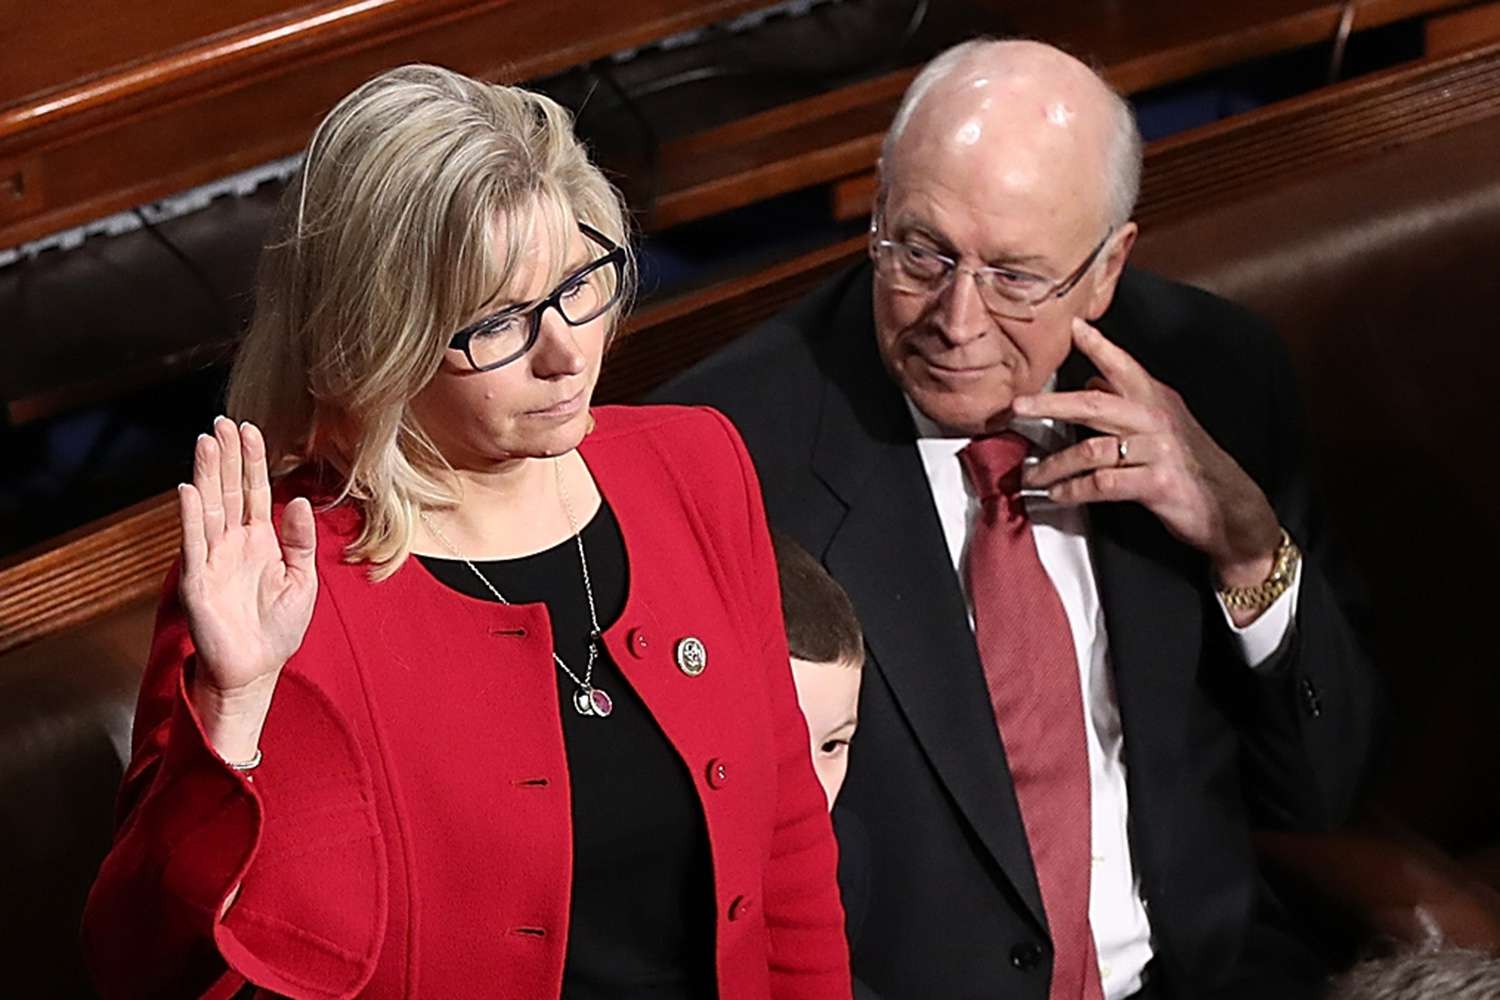 Liz and Dick Cheney Were the Only Republicans to Attend the House's Anniversary Observance of Jan. 6 Rivolte